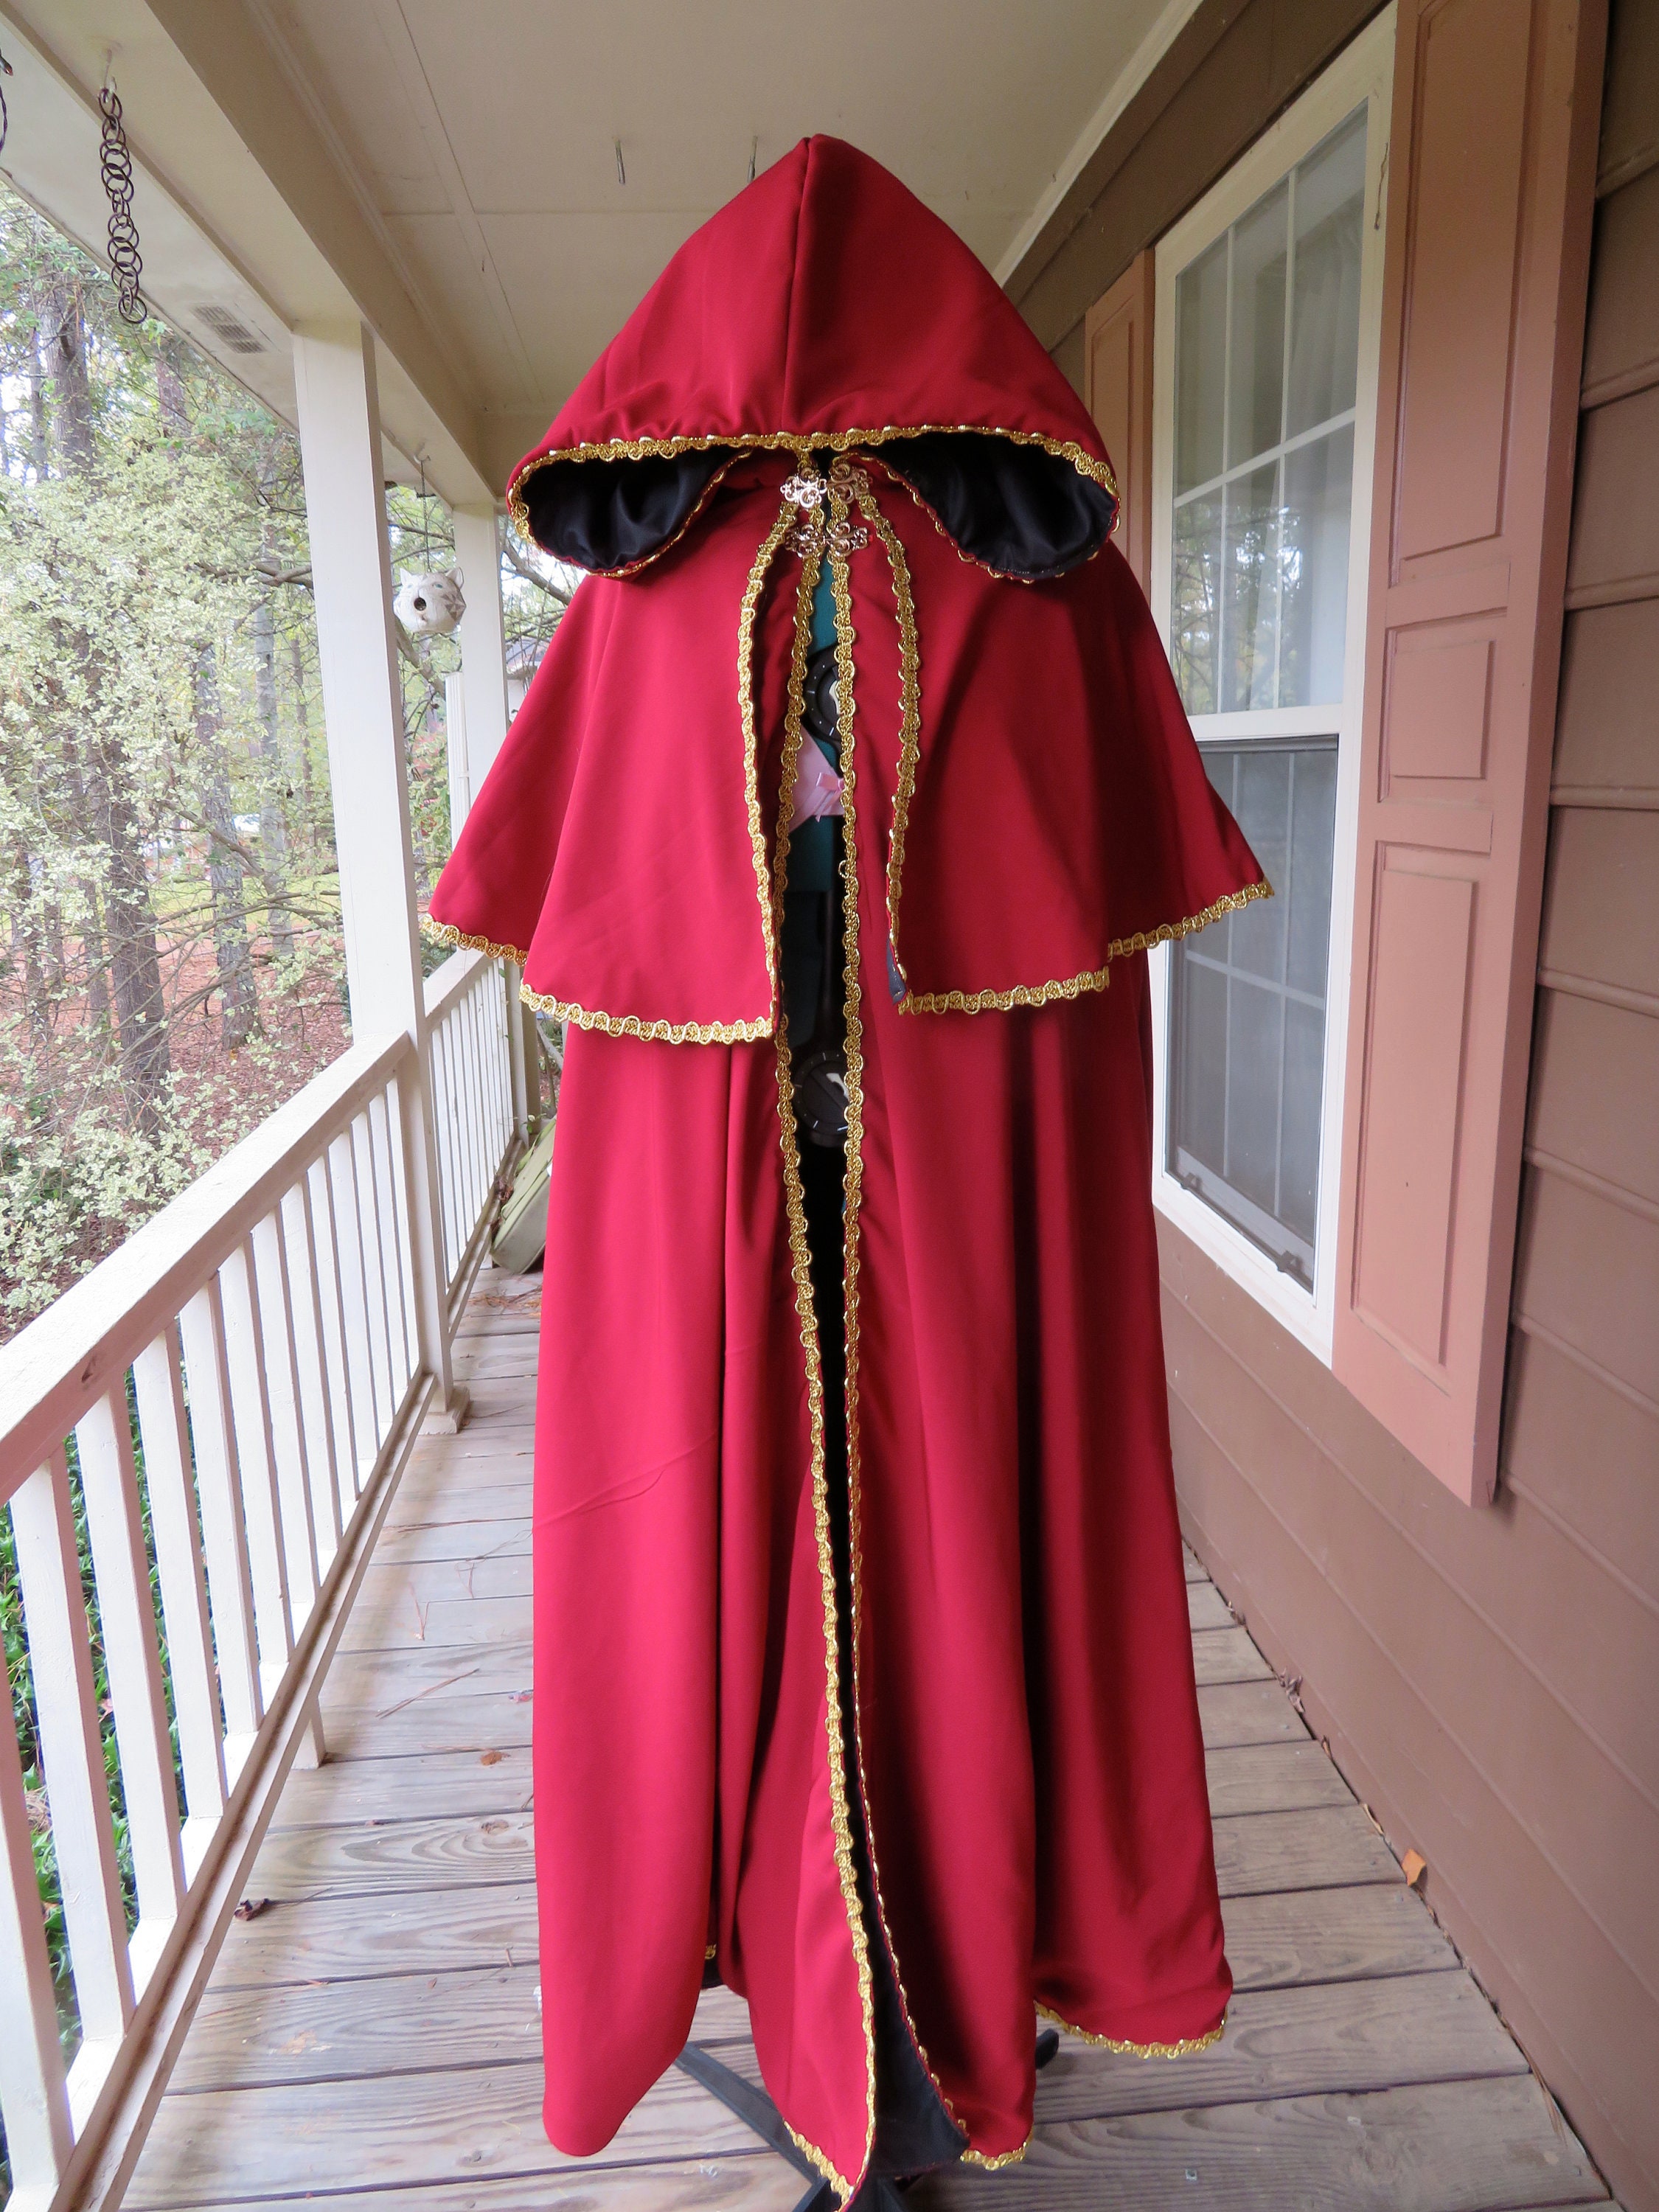 Dungeons and Dragons Costumes - Etsy